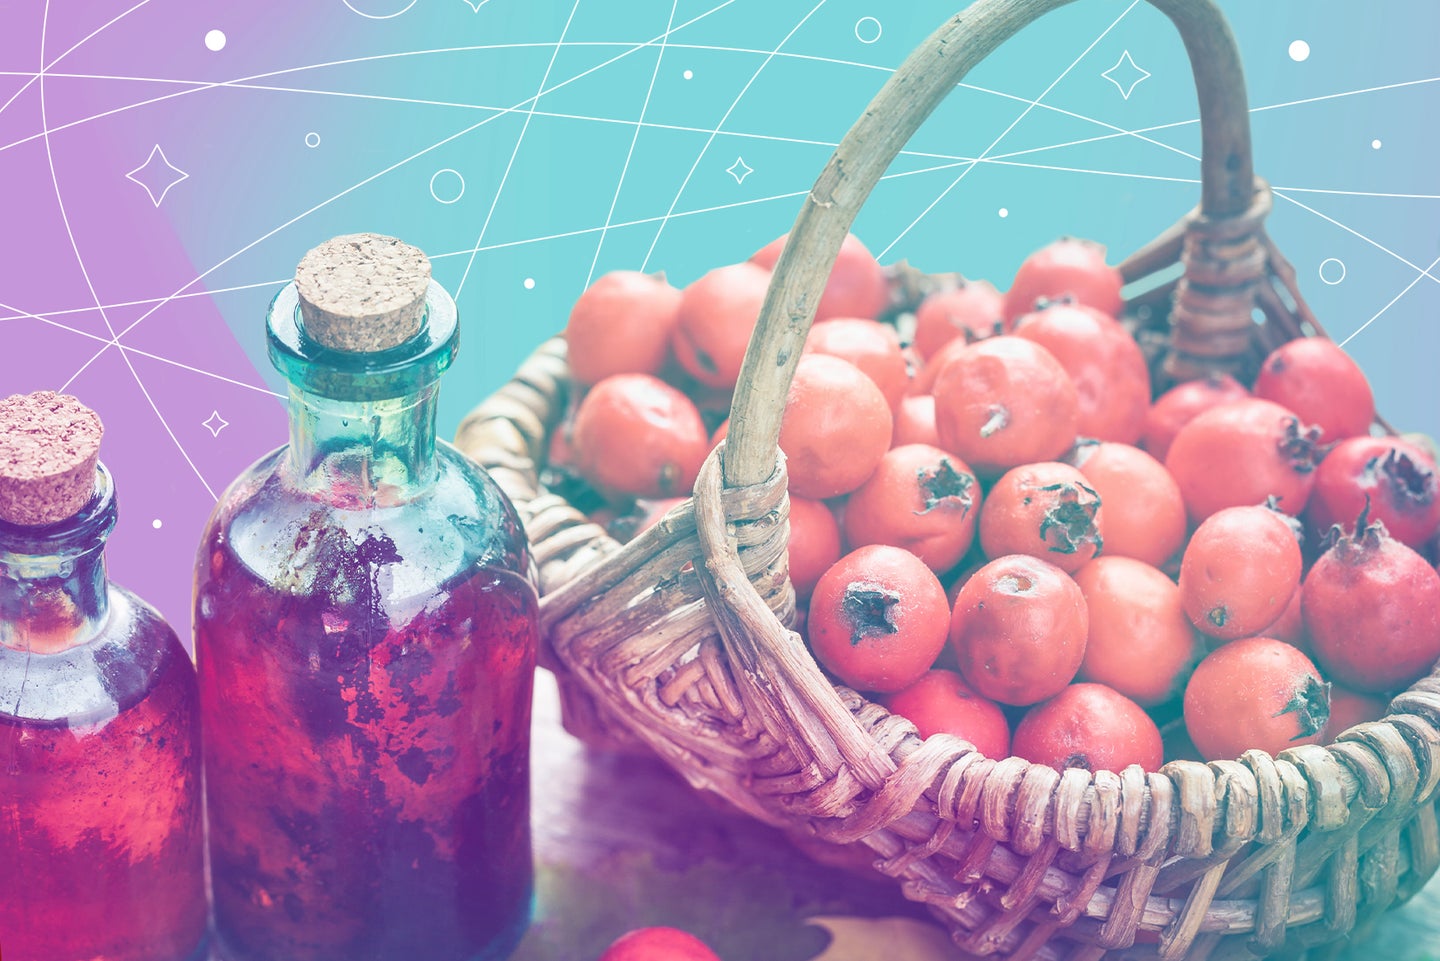 Basket of pomegranate fruits with glass bottles of tea on a light purple and seagreen background